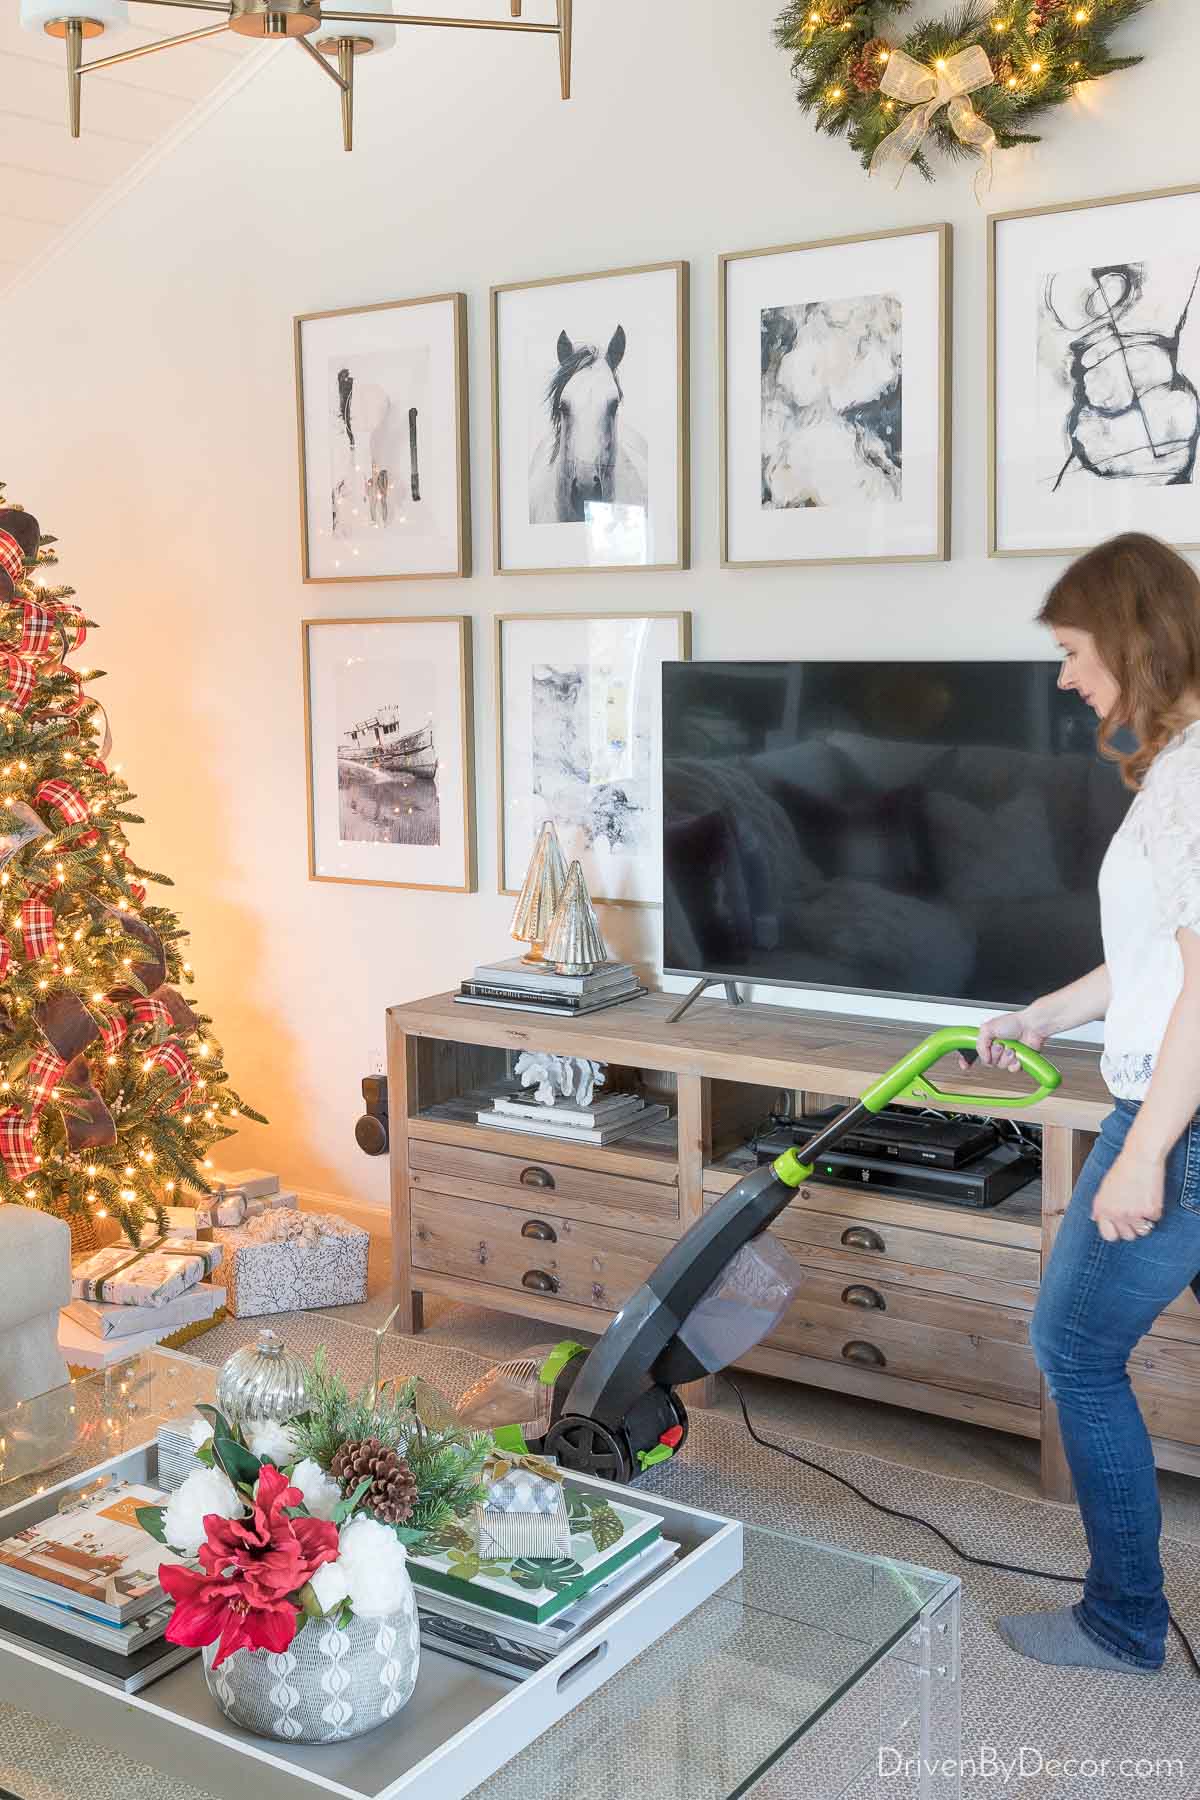 These 8 Cleaning Tools Under $40 Will Make Your Home Spotless This